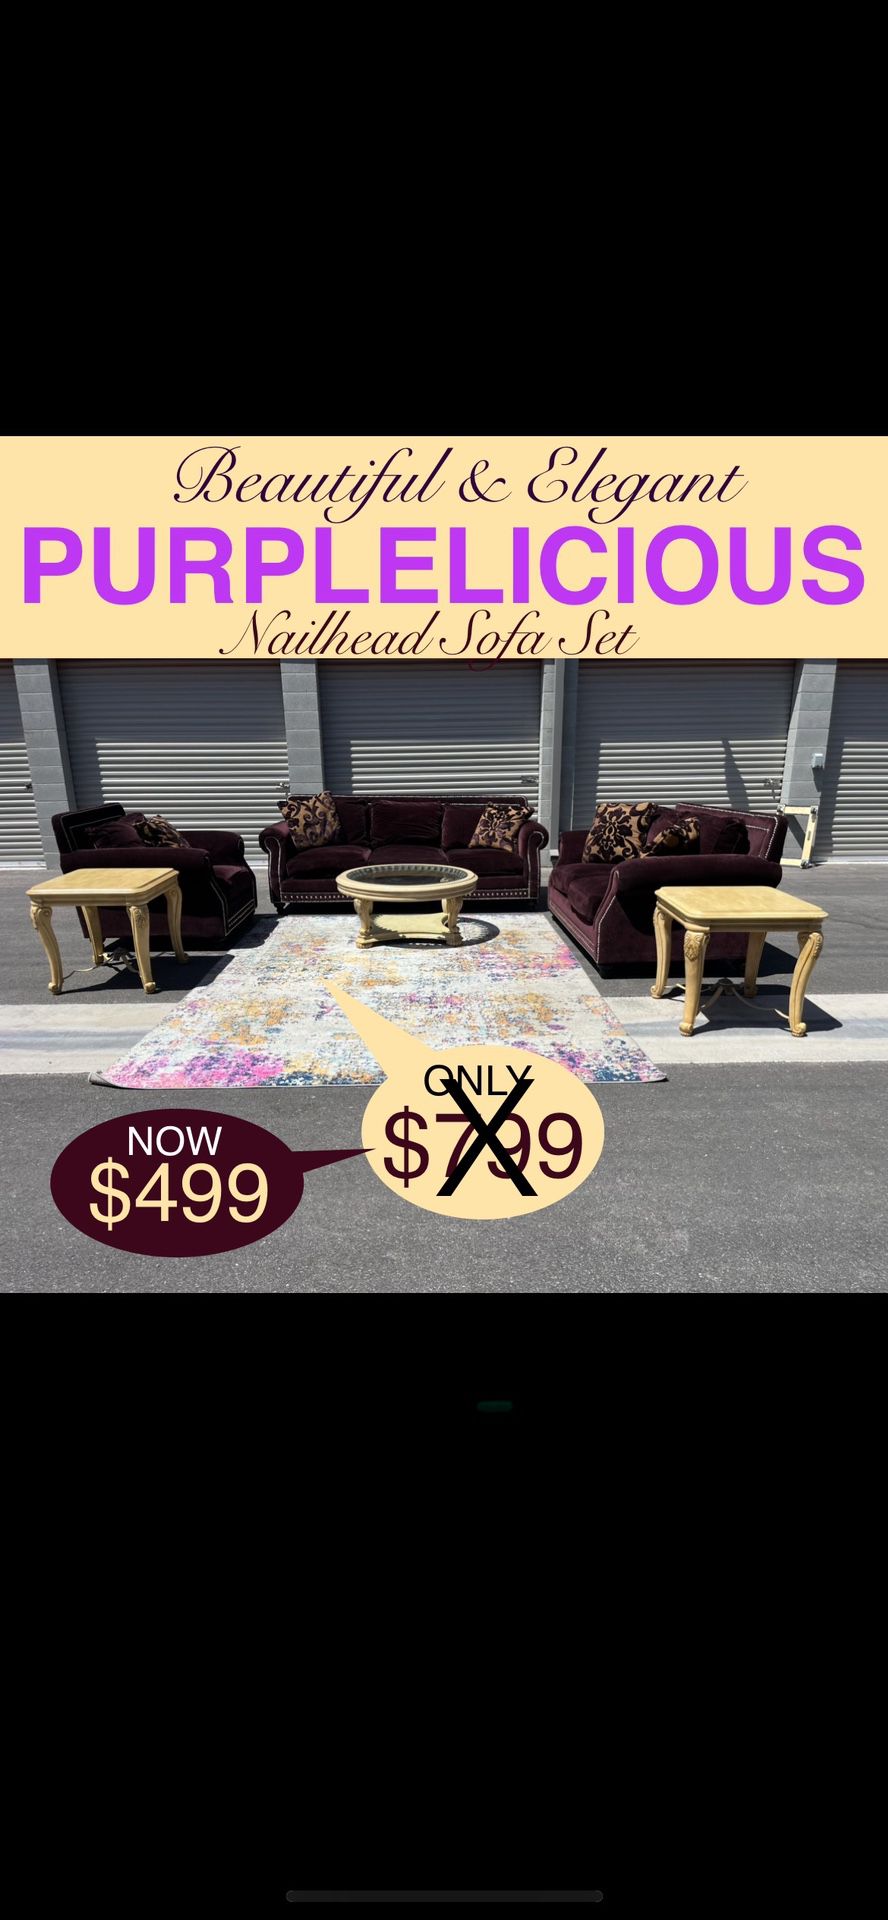 😍BEAUTIFUL & ELEGANT LIVING ROOM “PURPLELICIOUS” SOFA SET 💜 DELIVERY AVAILABLE 🚚 